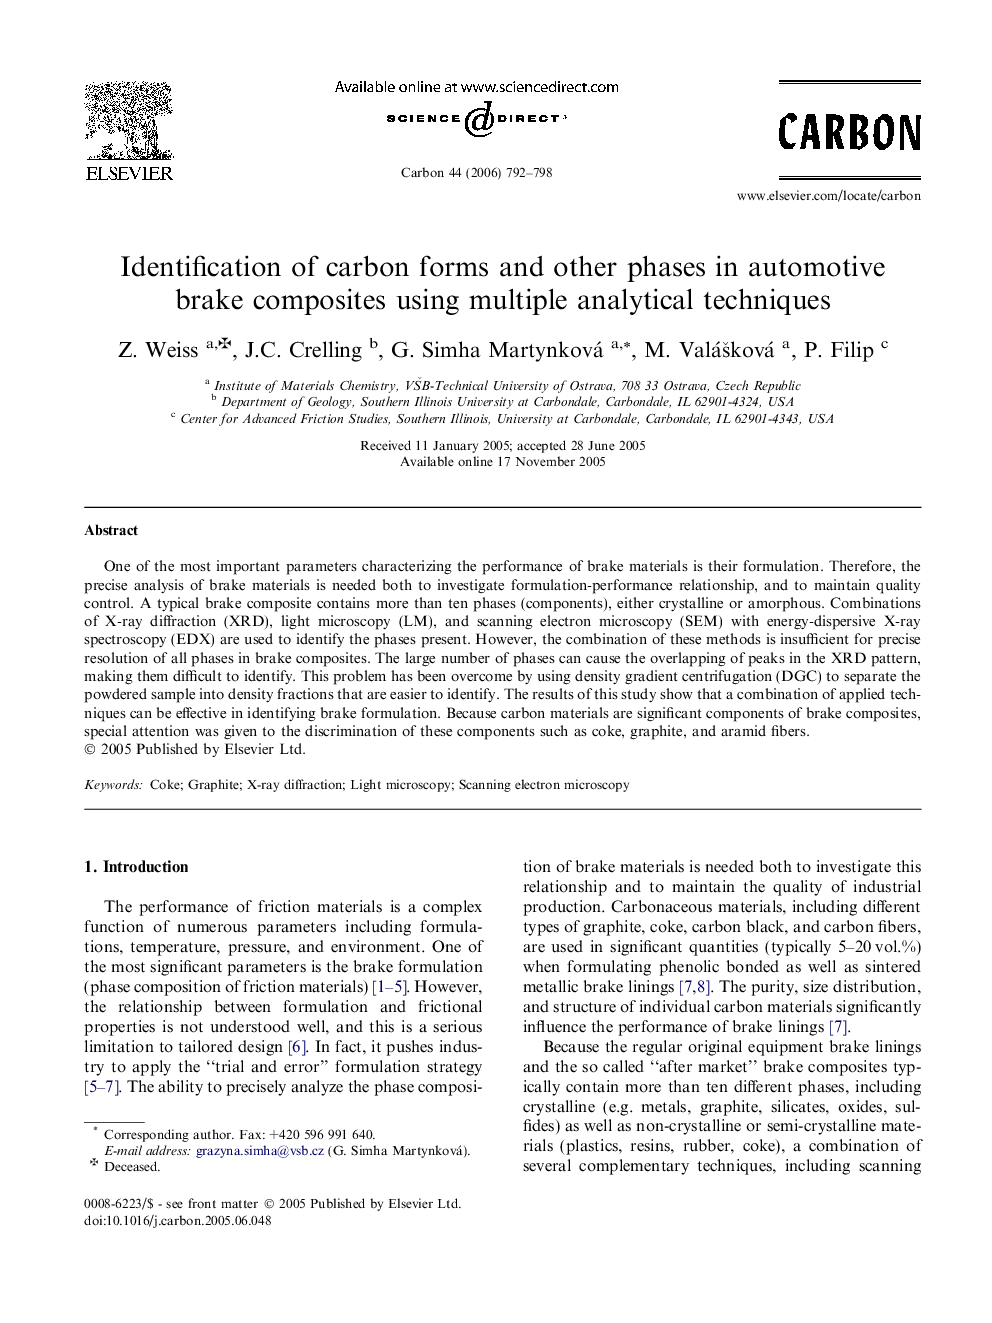 Identification of carbon forms and other phases in automotive brake composites using multiple analytical techniques